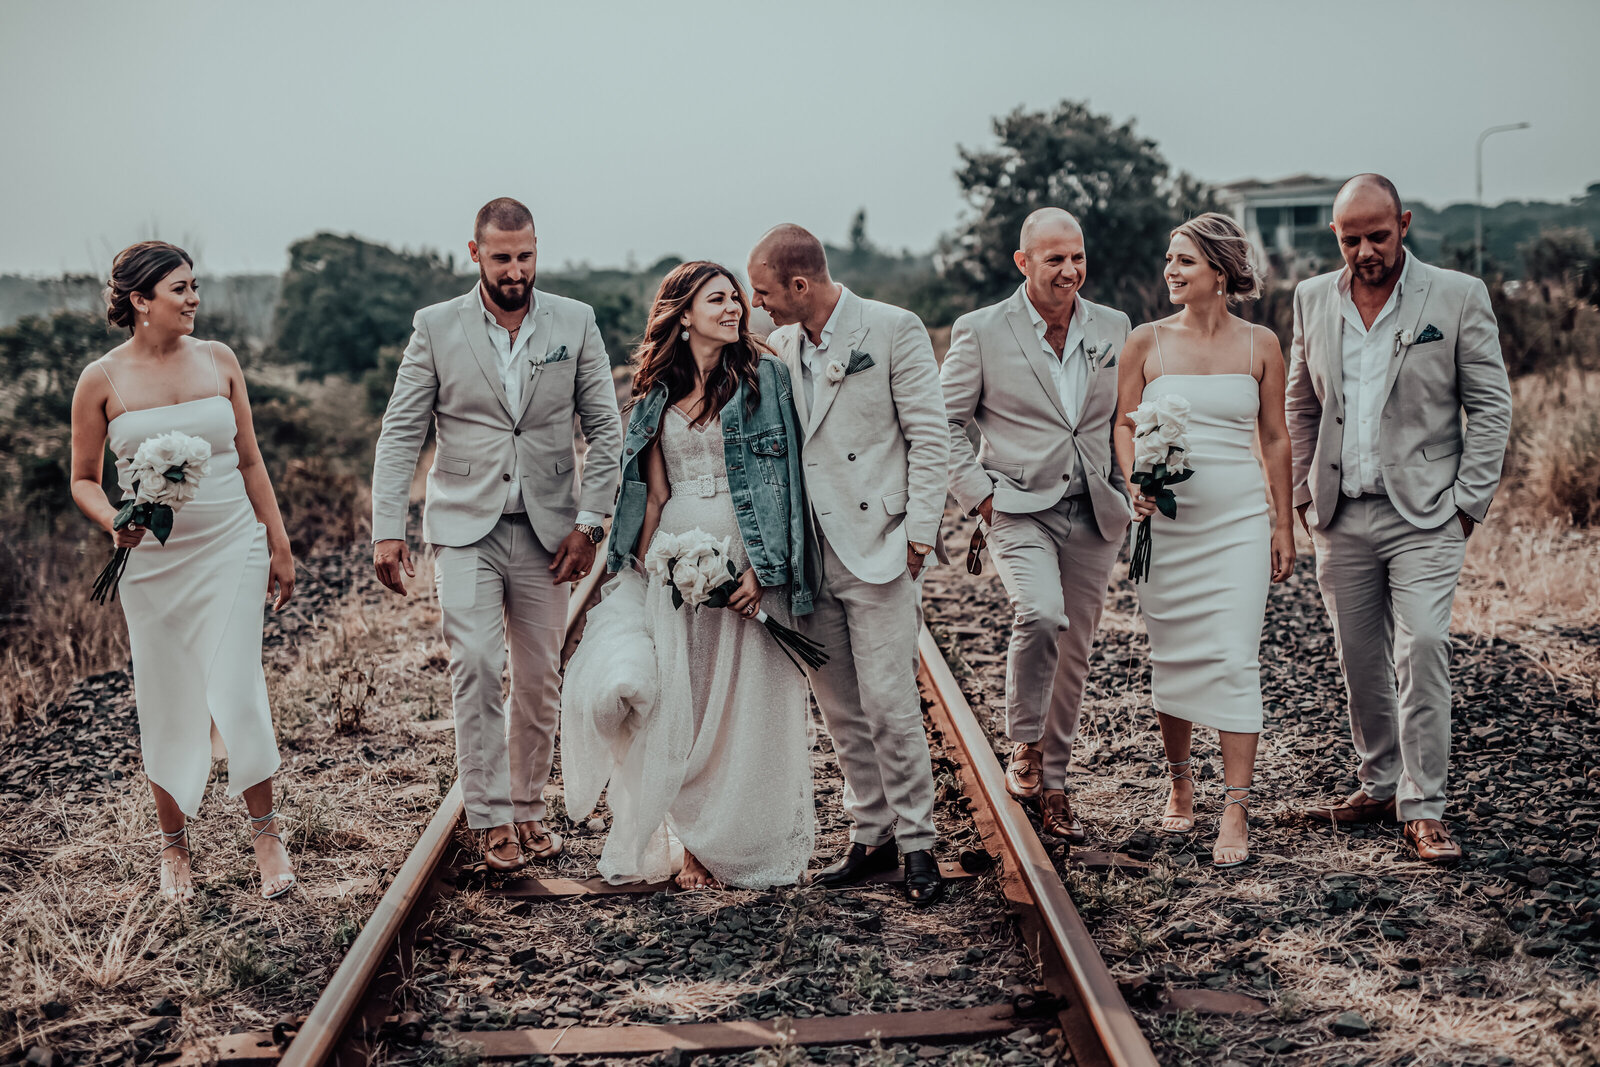 Wedded Couple with Friends at Railway Track